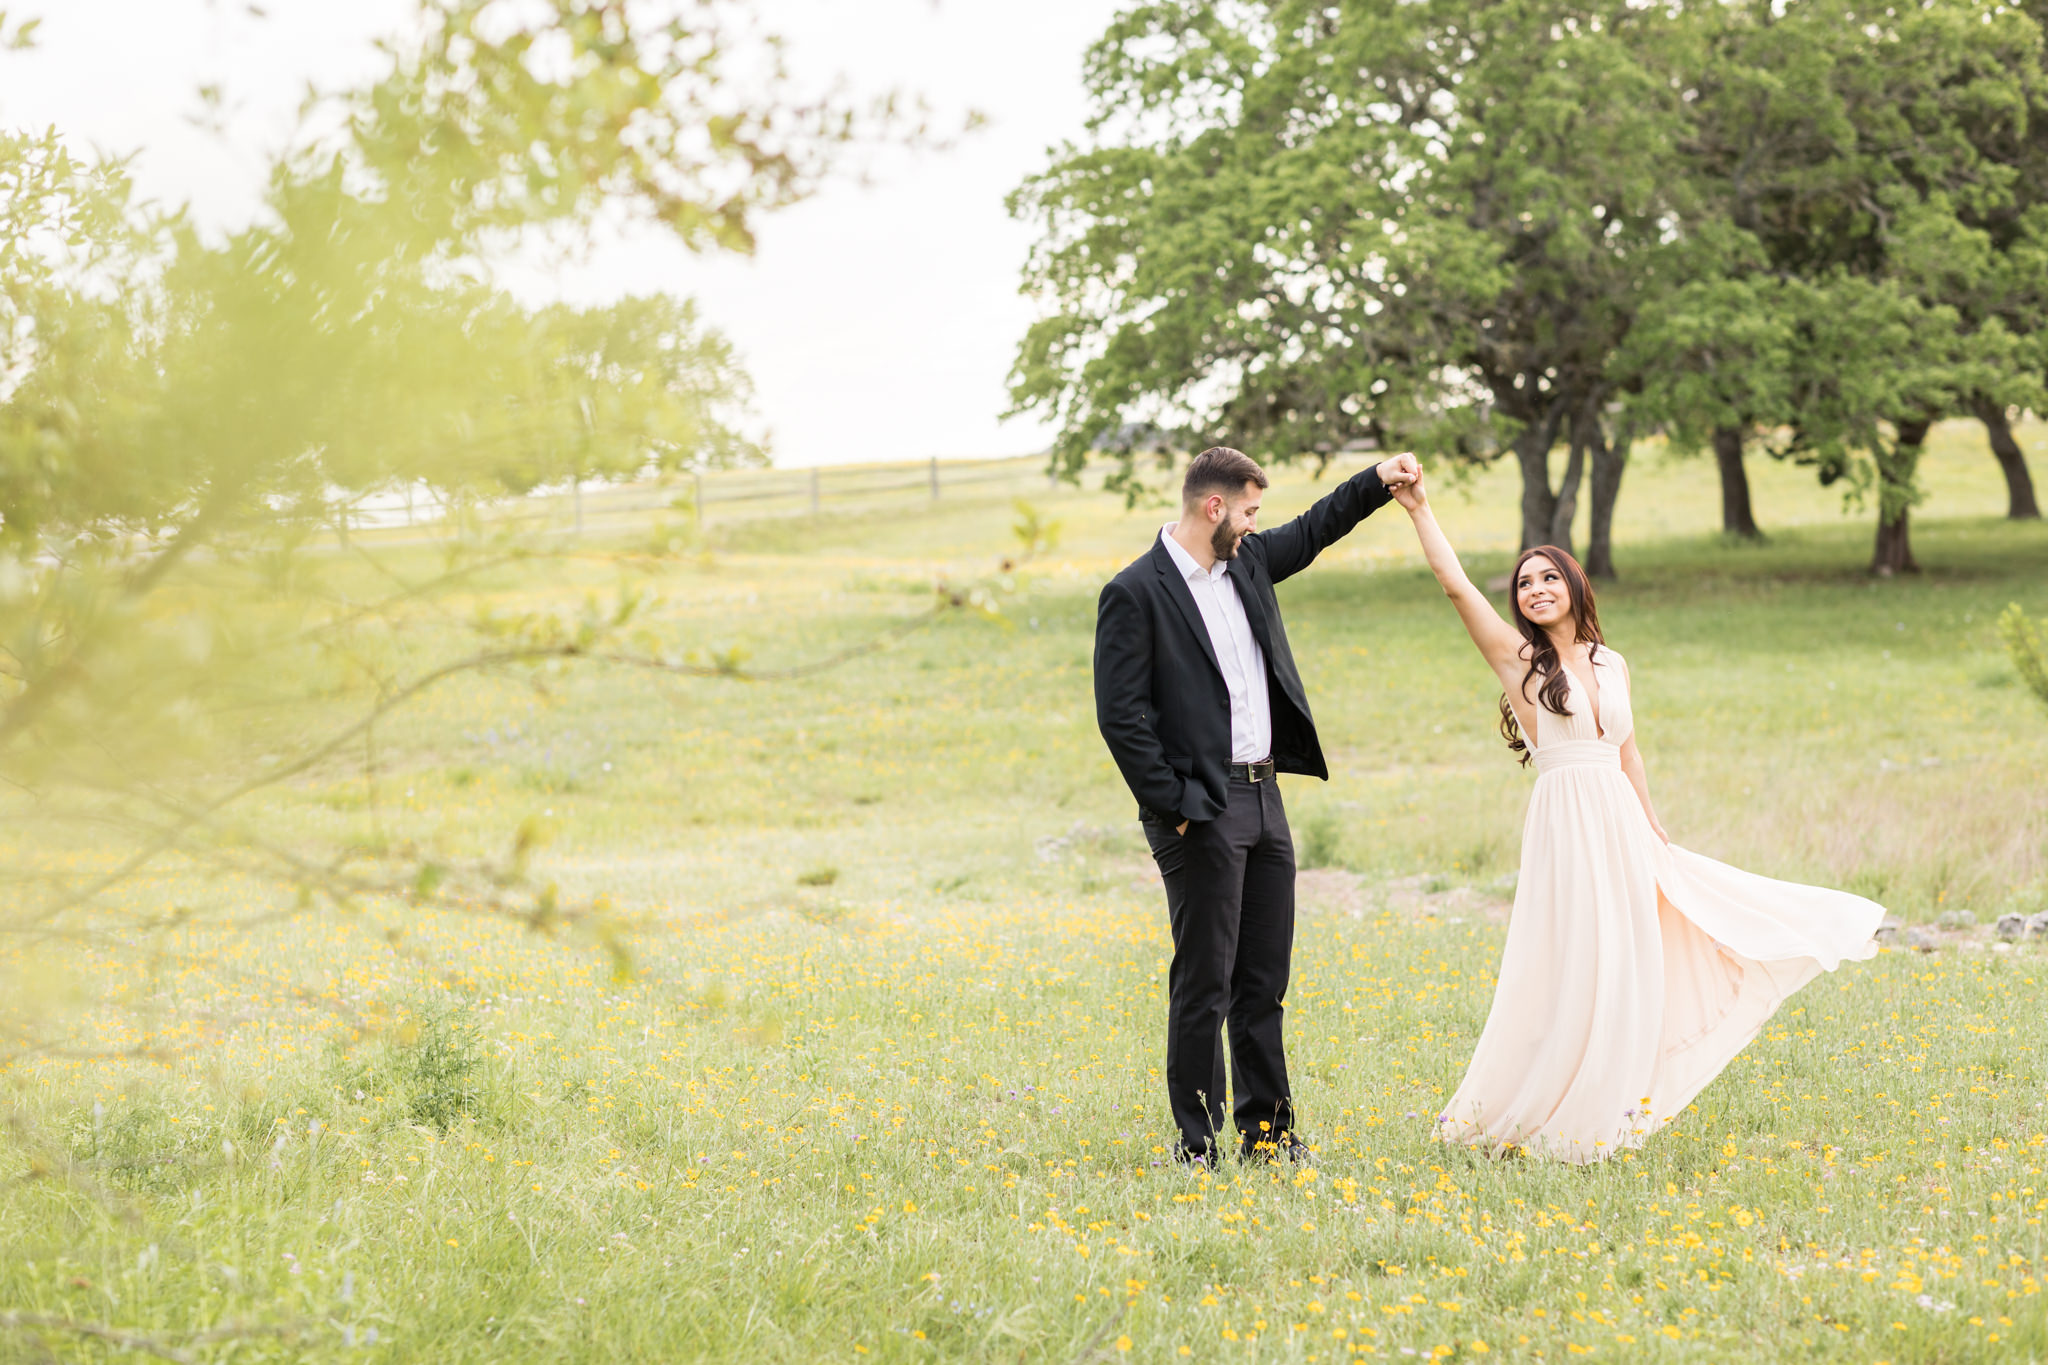 An Engagement Session at Overlook Park in Canyon Lake, TX by Dawn Elizabeth Studios, New Braunfels Wedding Photographer